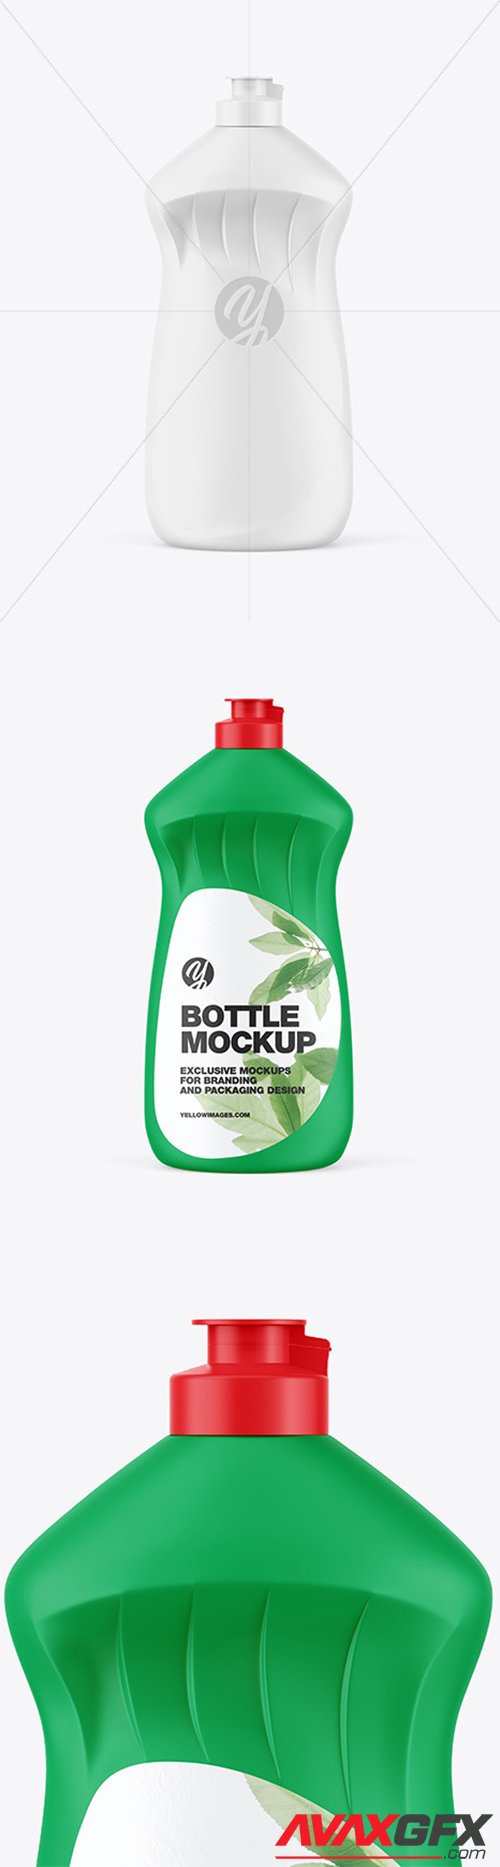 Download Washing Up Liquid Glossy Bottle W Closed Cap Mockup 62001 Avaxgfx All Downloads That You Need In One Place Graphic From Nitroflare Rapidgator Yellowimages Mockups